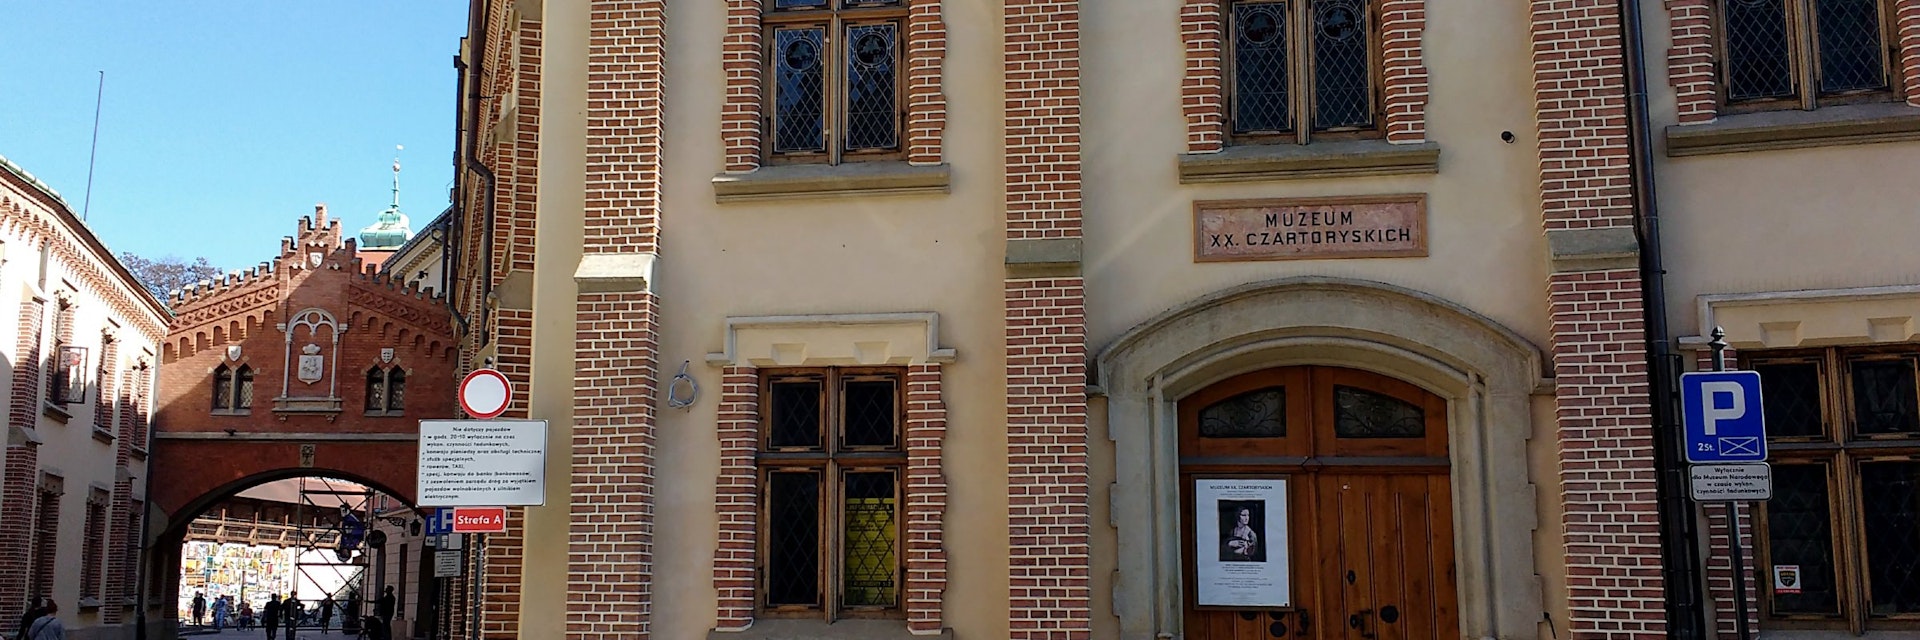 Exterior of the Czartoryski Museum, home to a rich collection of art